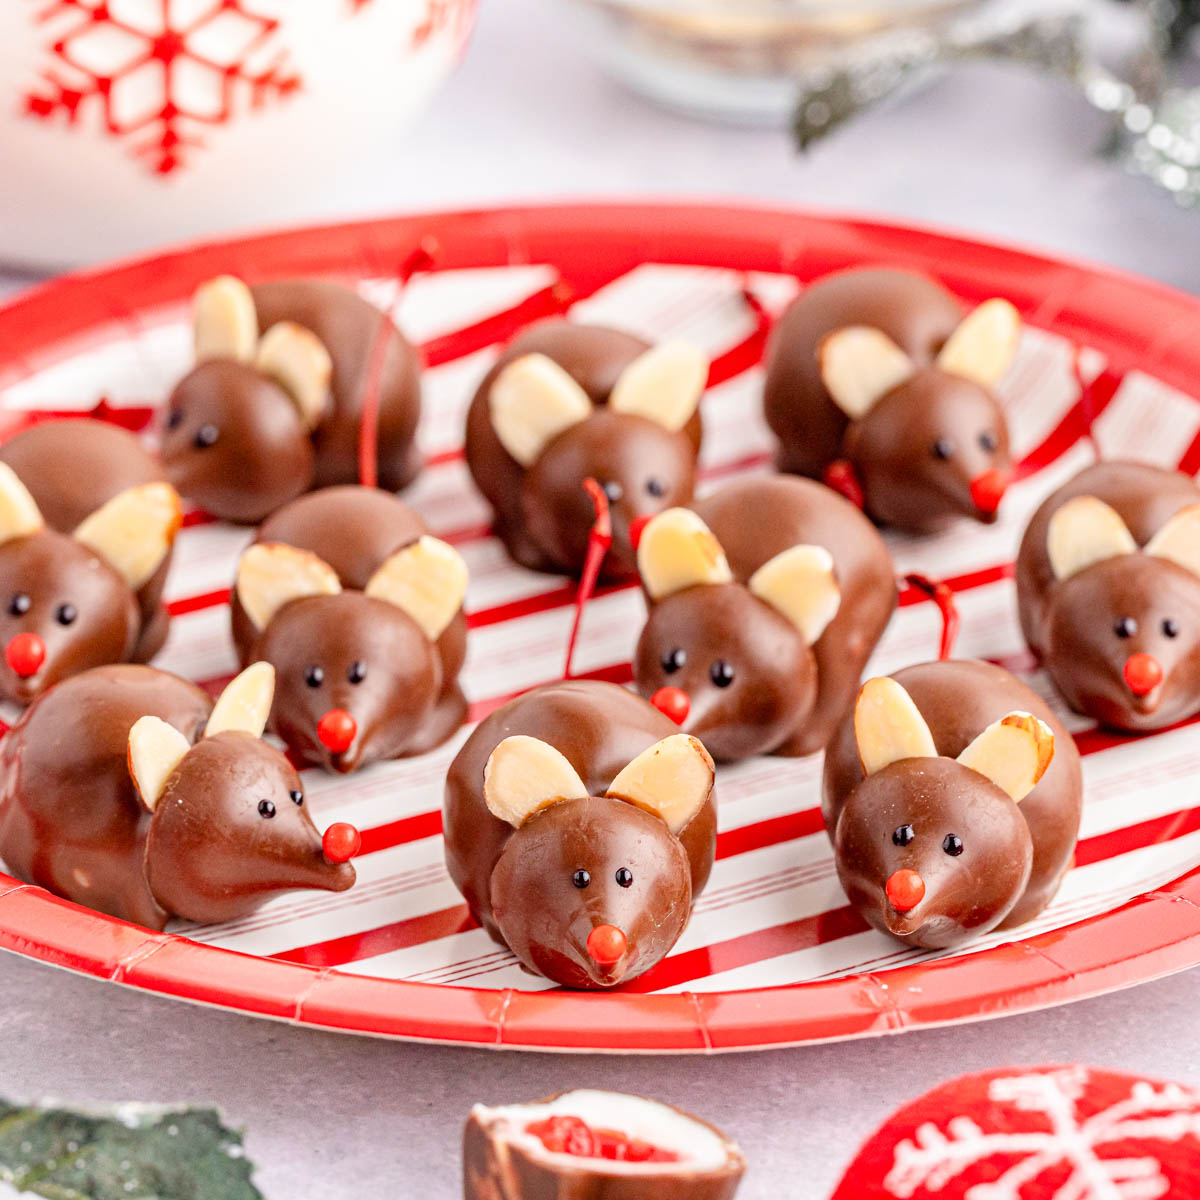 A festive red and white plate with chocolate covered cherry mice.